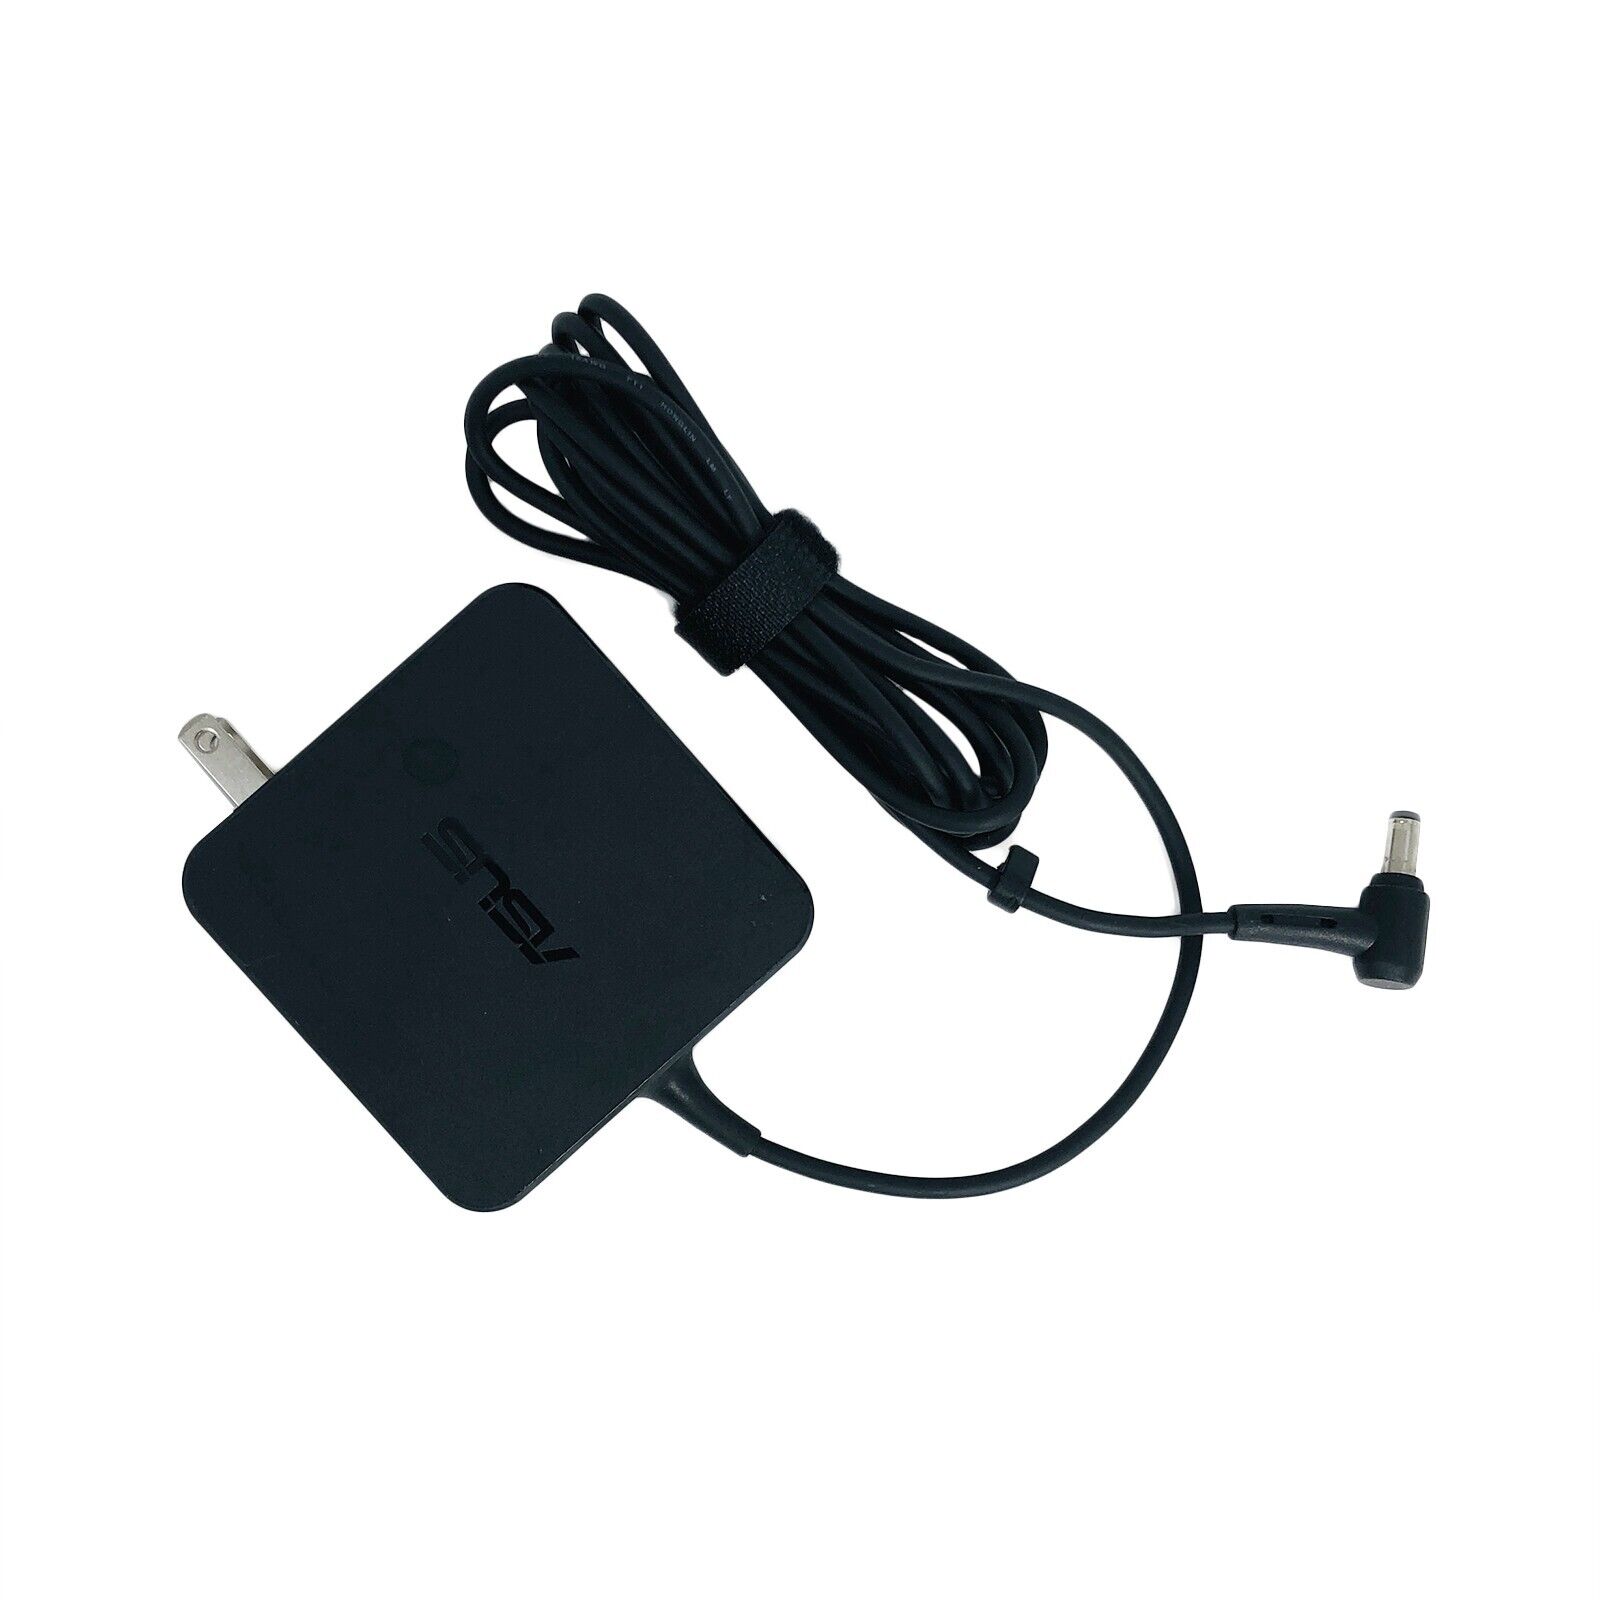 Geniune Asus 65W AC Wall Power Adapter for X301A X401 X401A X401U X402C Laptop